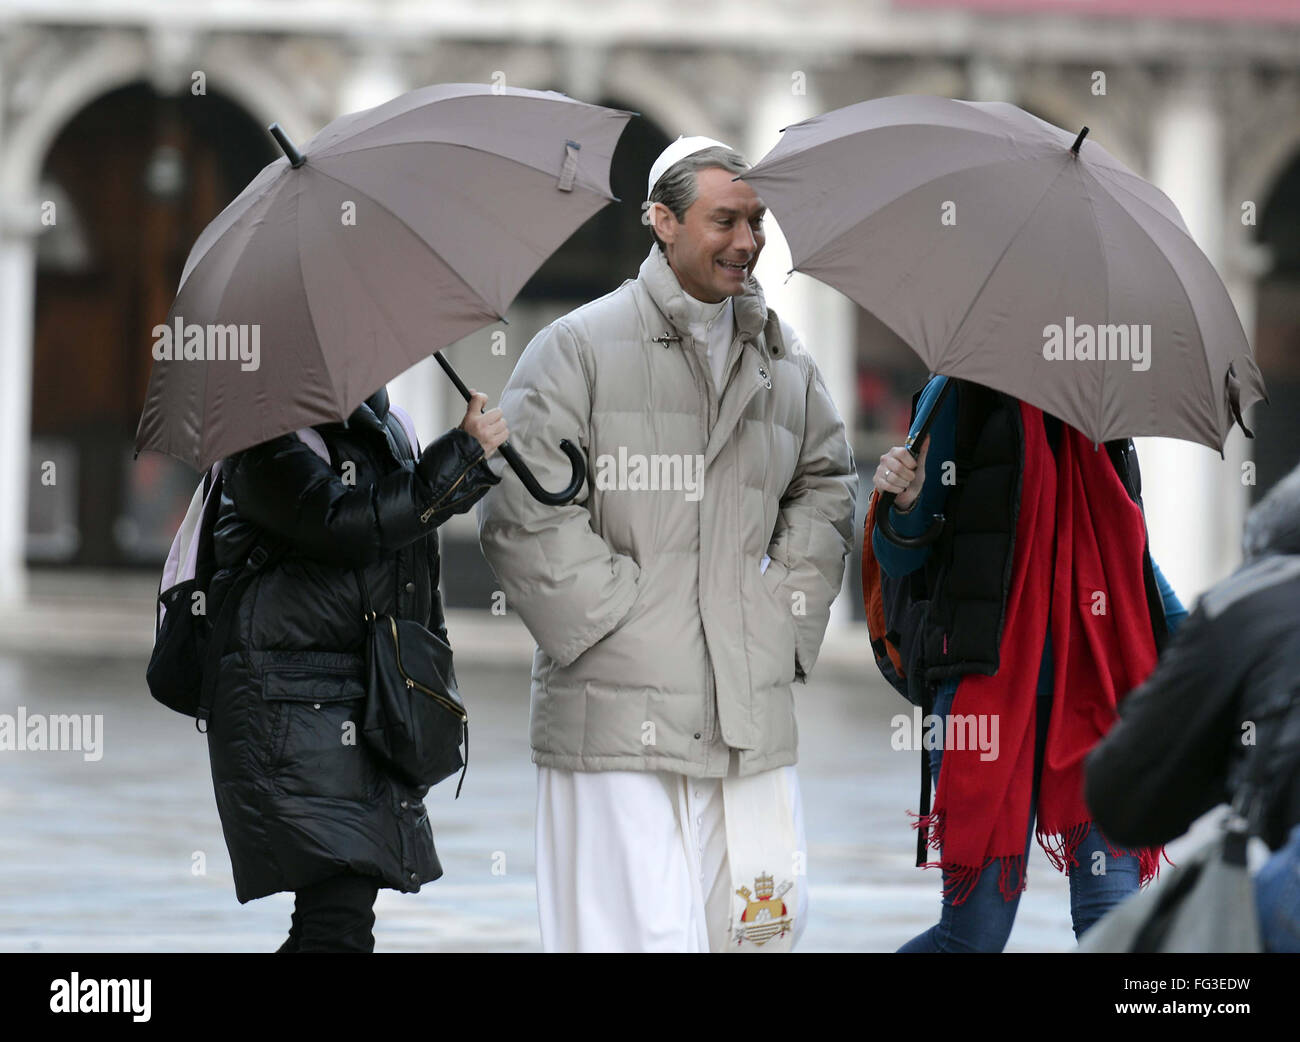 Jude Law films scenes for 'The Young Pope' on location Venice Featuring:  Jude Law Where: Venice, Italy When: 12 Jan 2016 Stock Photo - Alamy